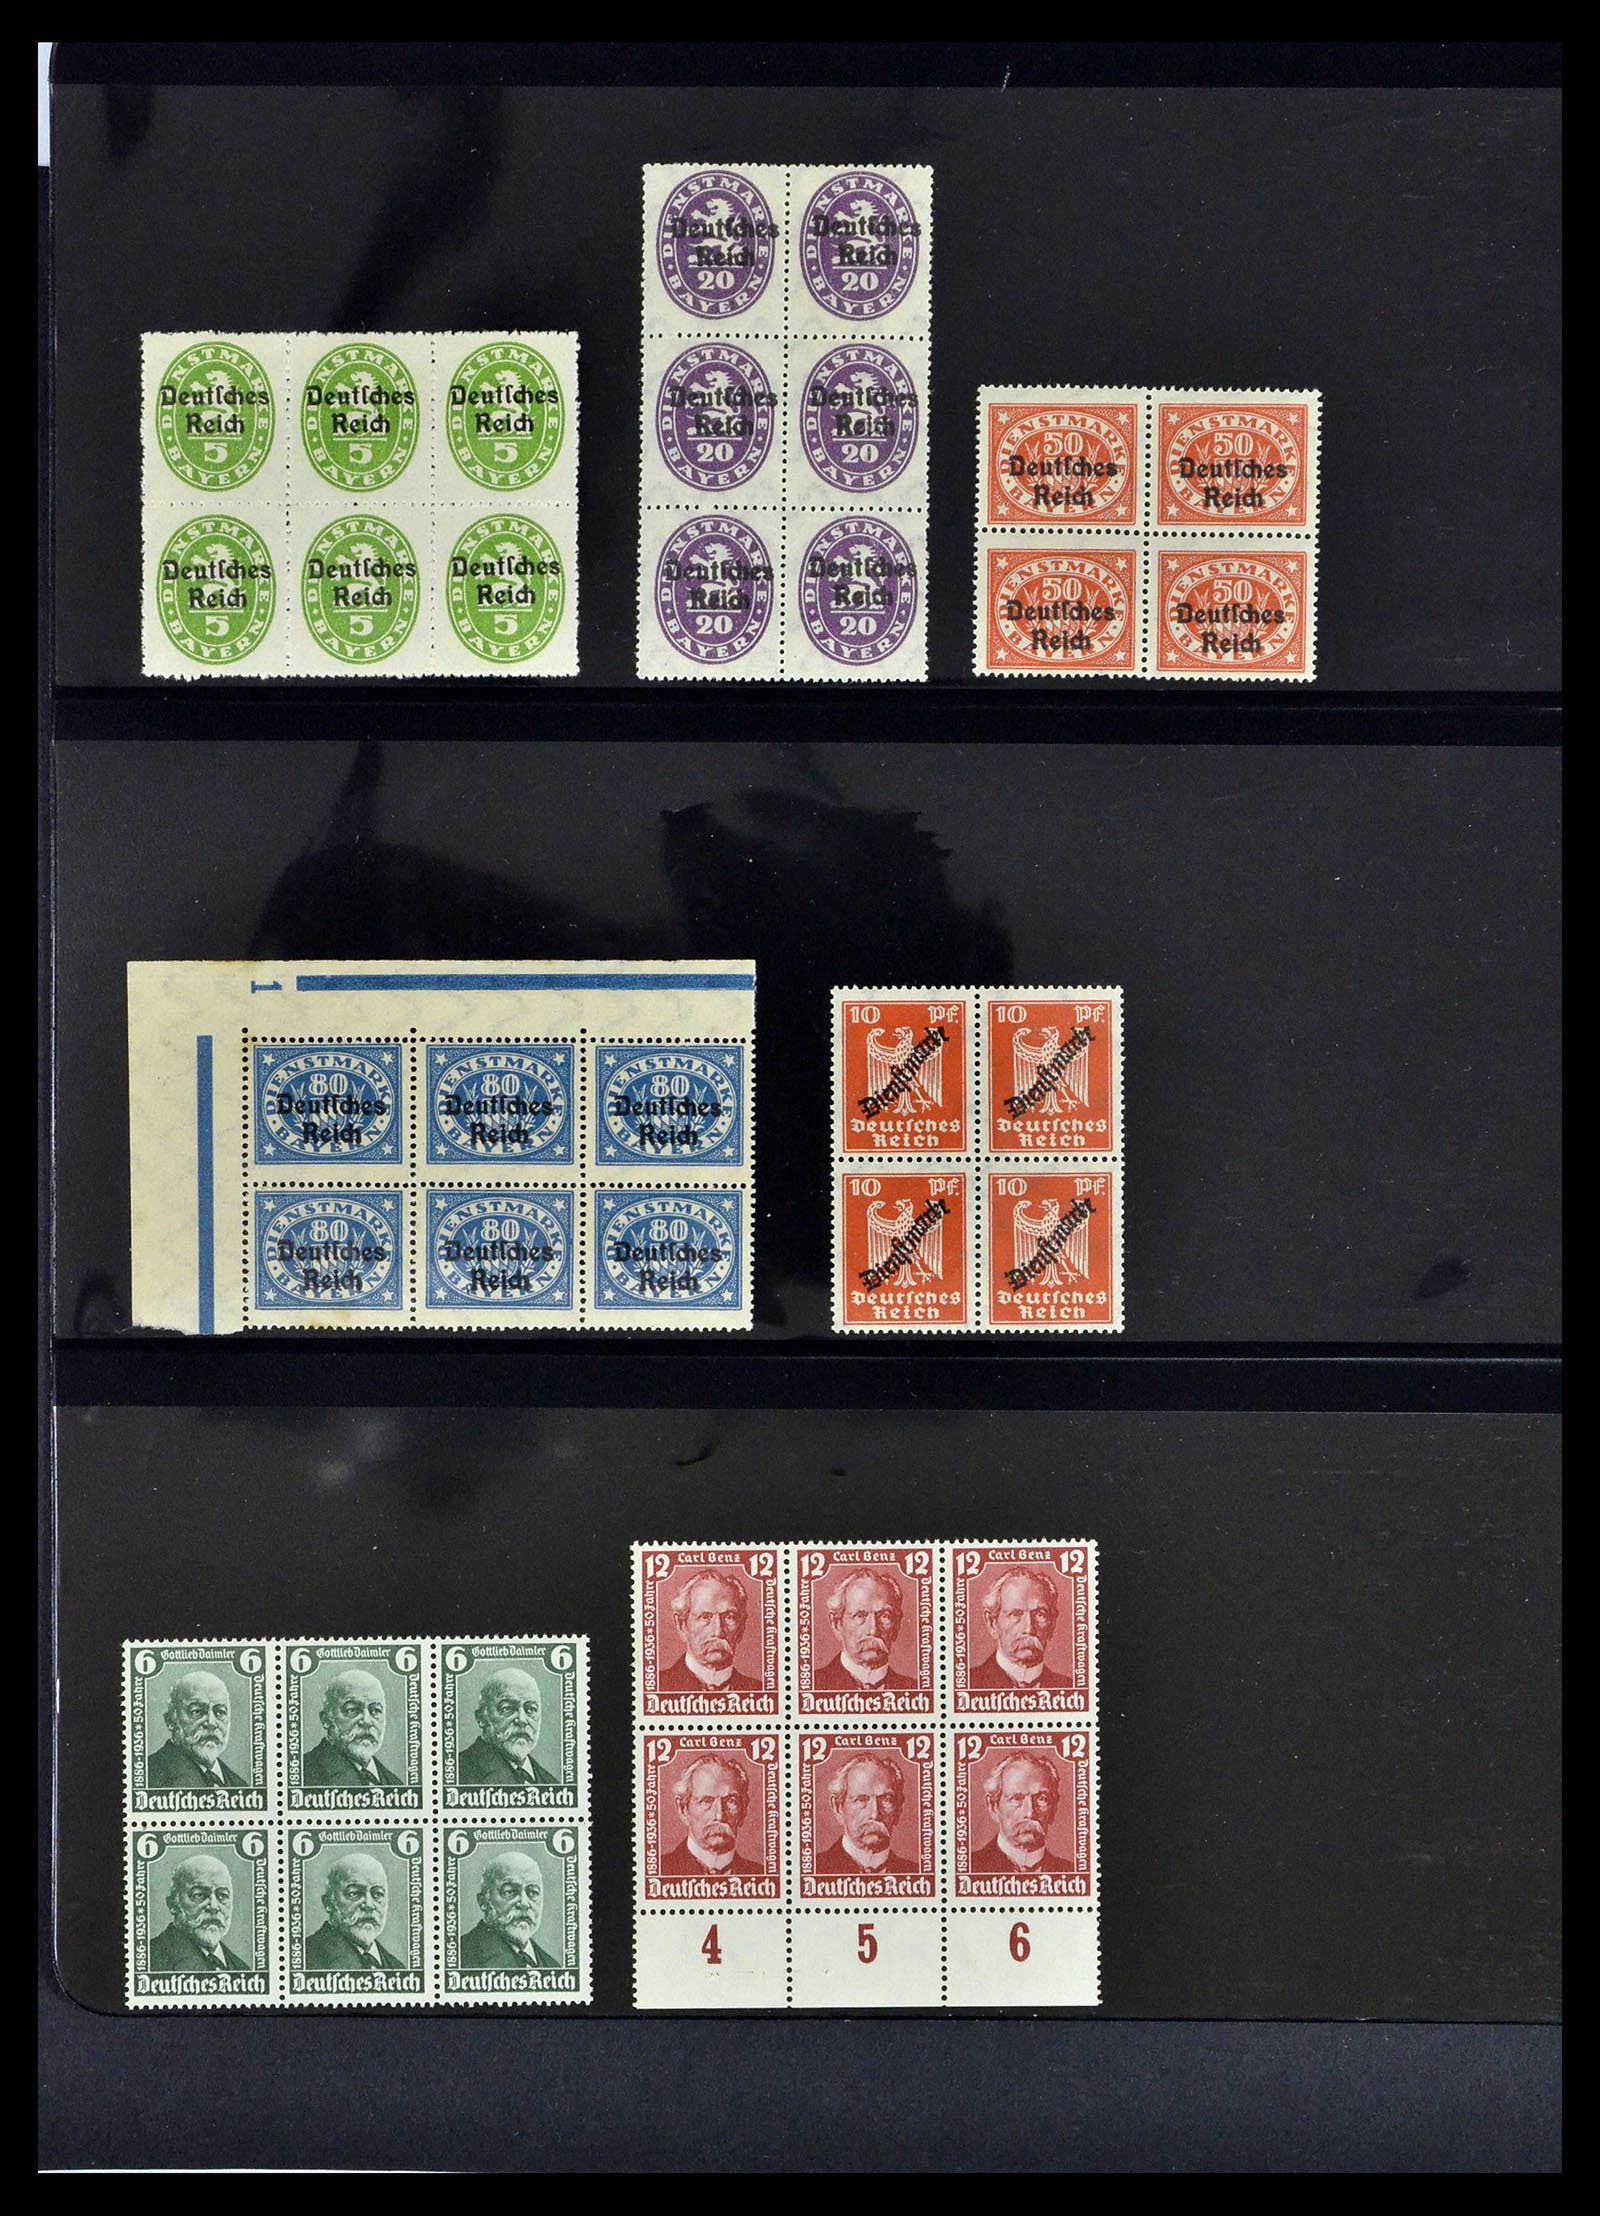 39255 0032 - Stamp collection 39255 German Reich MNH blocks of 4.